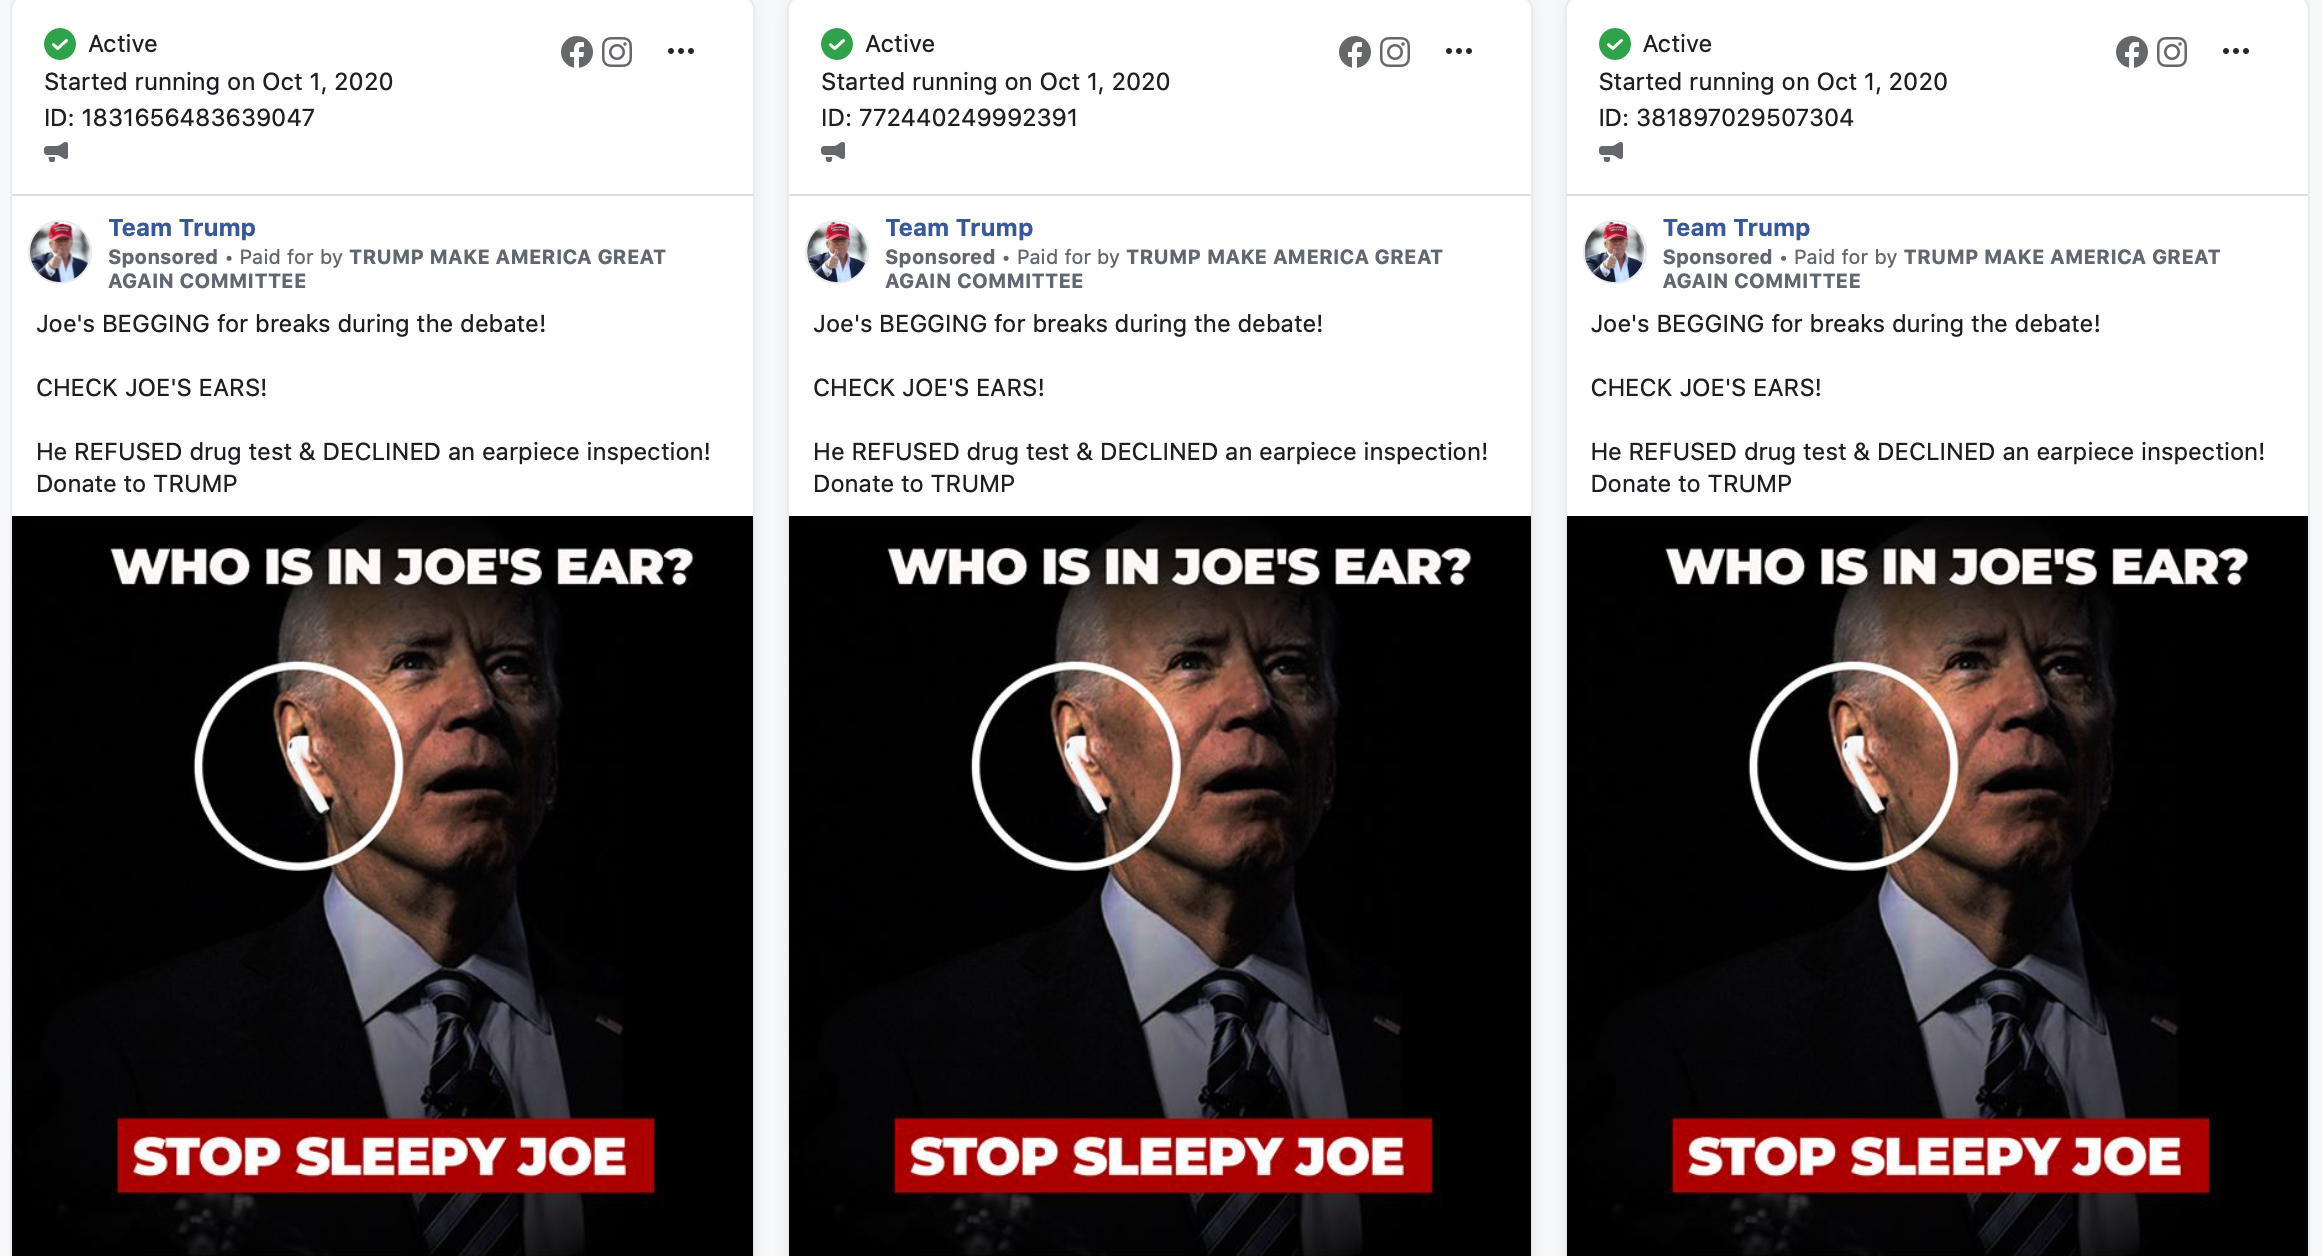 Facebook ads from Donald Trump's campaign promote a conspiracy that Joe Biden would rely on an earpiece during their first debate.